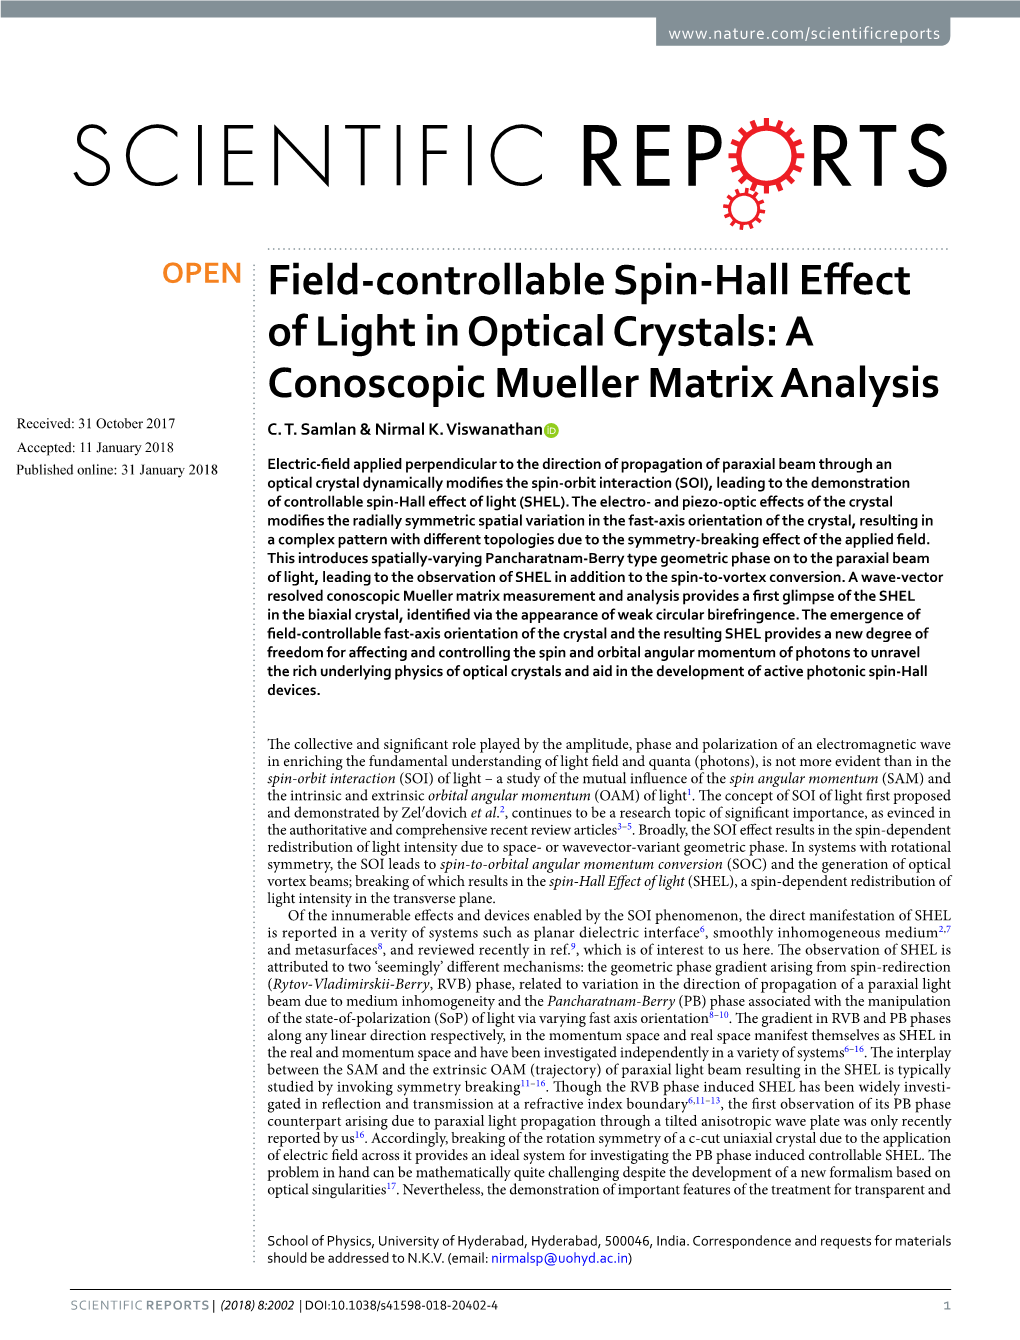 Field-Controllable Spin-Hall Effect of Light in Optical Crystals: A